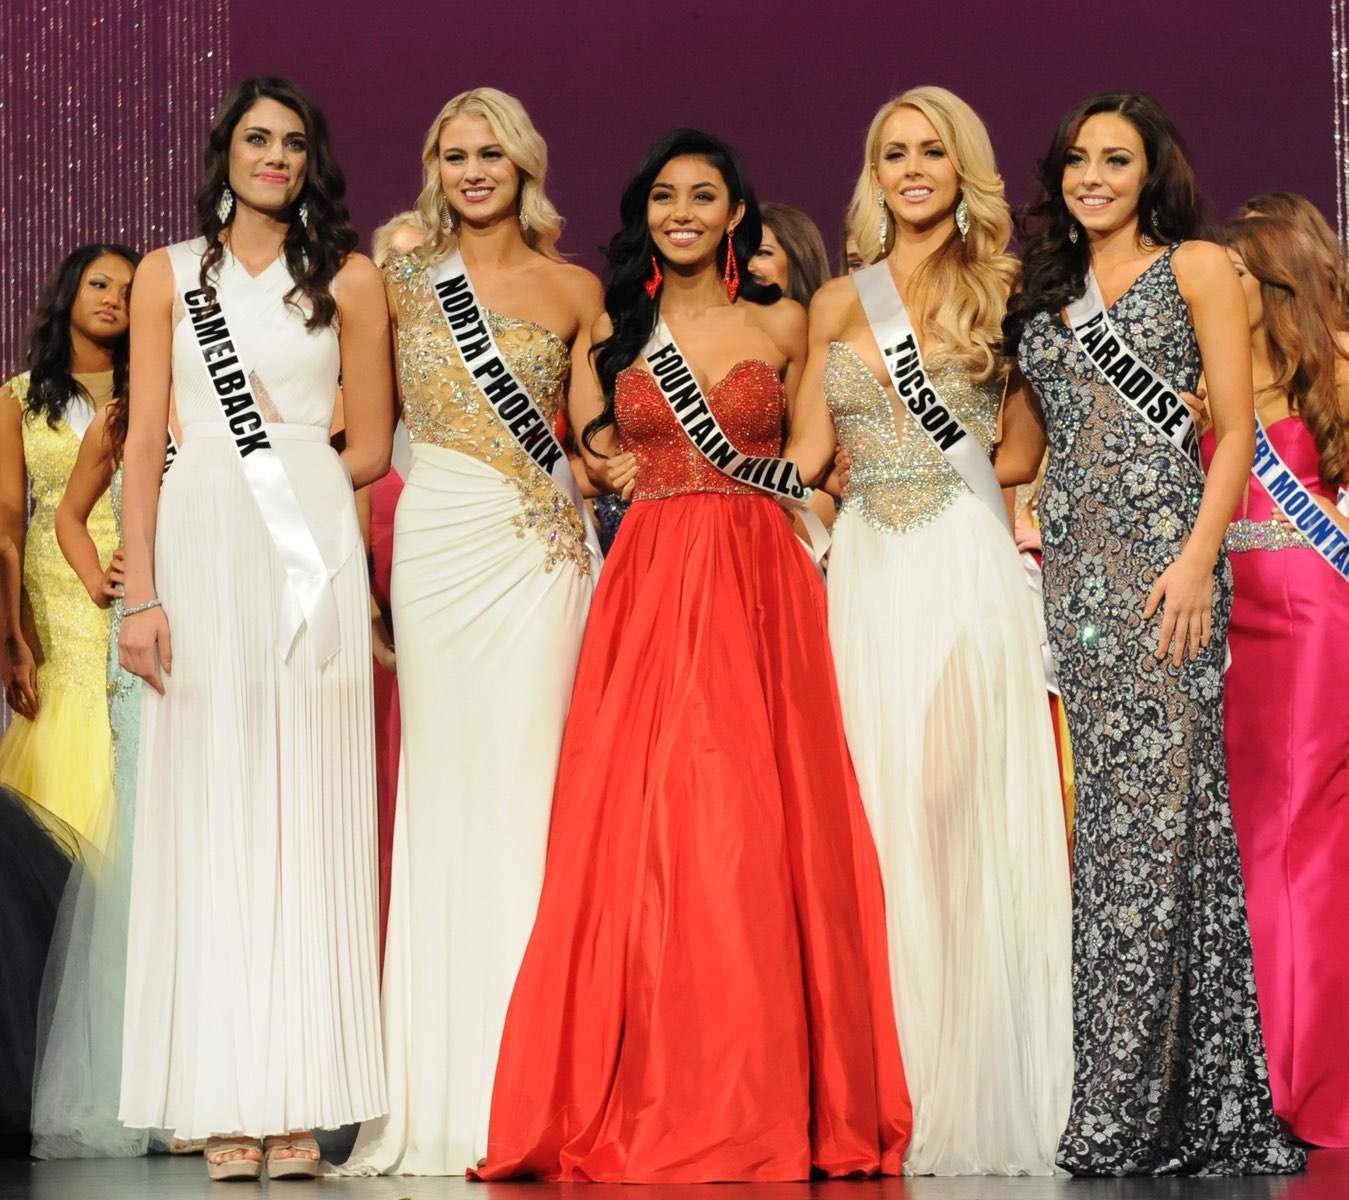 Finalists Paige Pacheco Chelsea Myers, Lexe Richardson, Tommy Lynn Calhoun and Dylan Hendricks wait to find out who has won Miss Arizona USA 2016